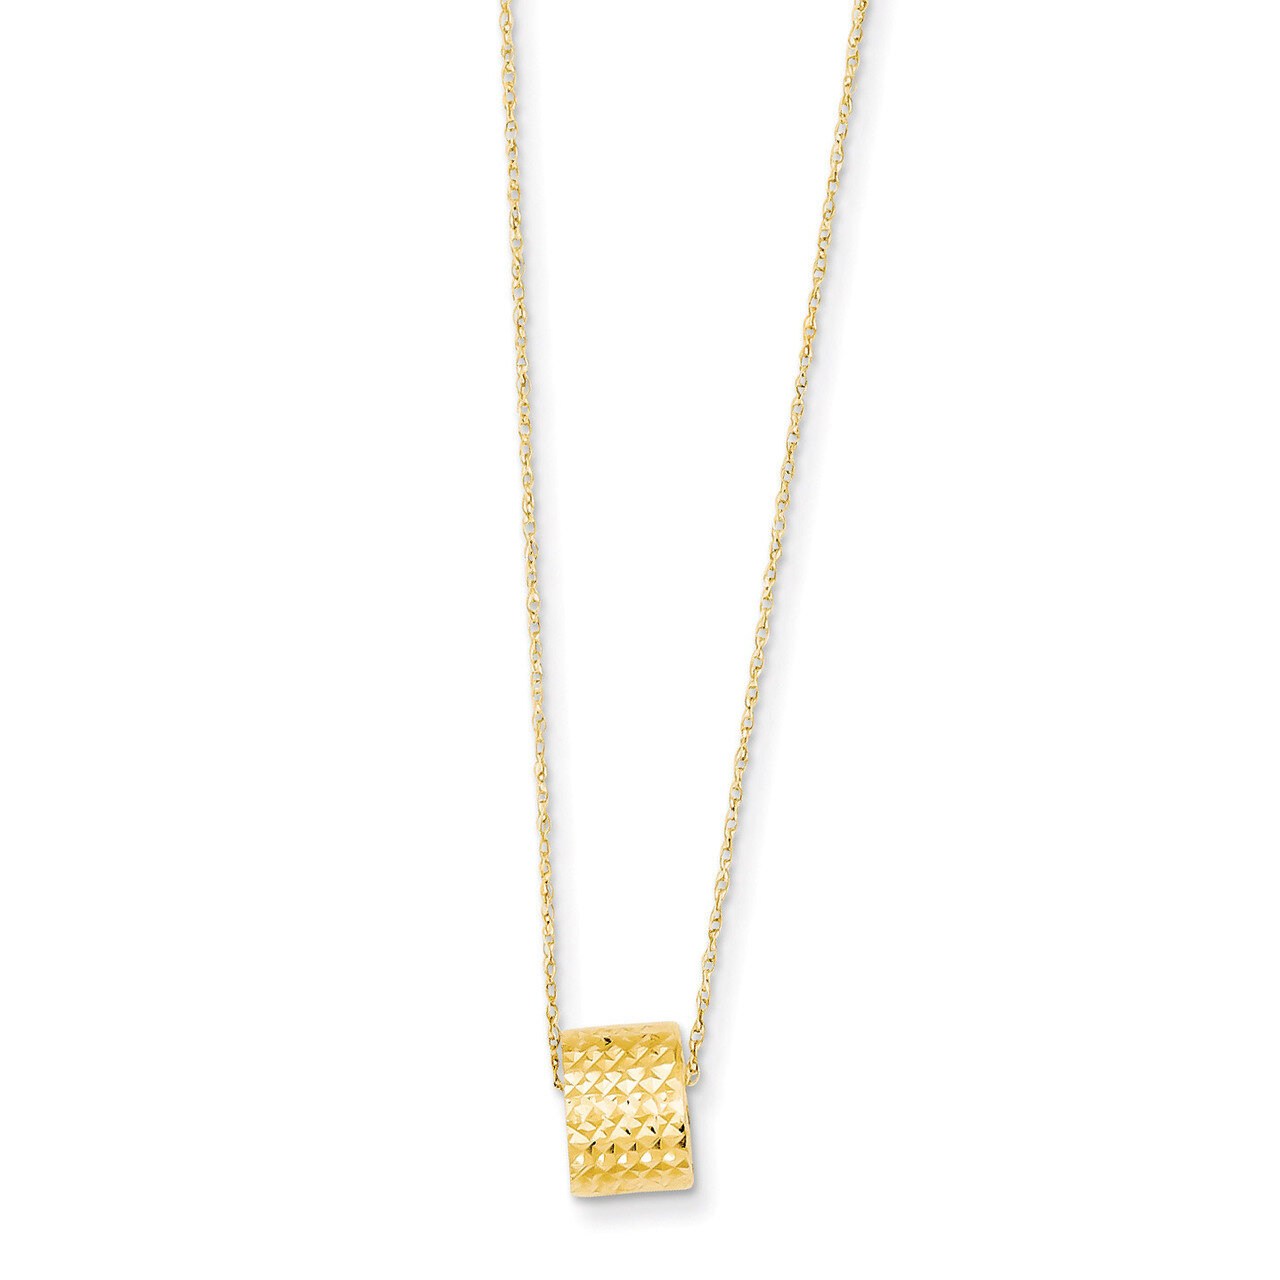 Rope Chain with Barrel Bead with 2in Extension Necklace 16 Inch 14k Gold SF2061-16